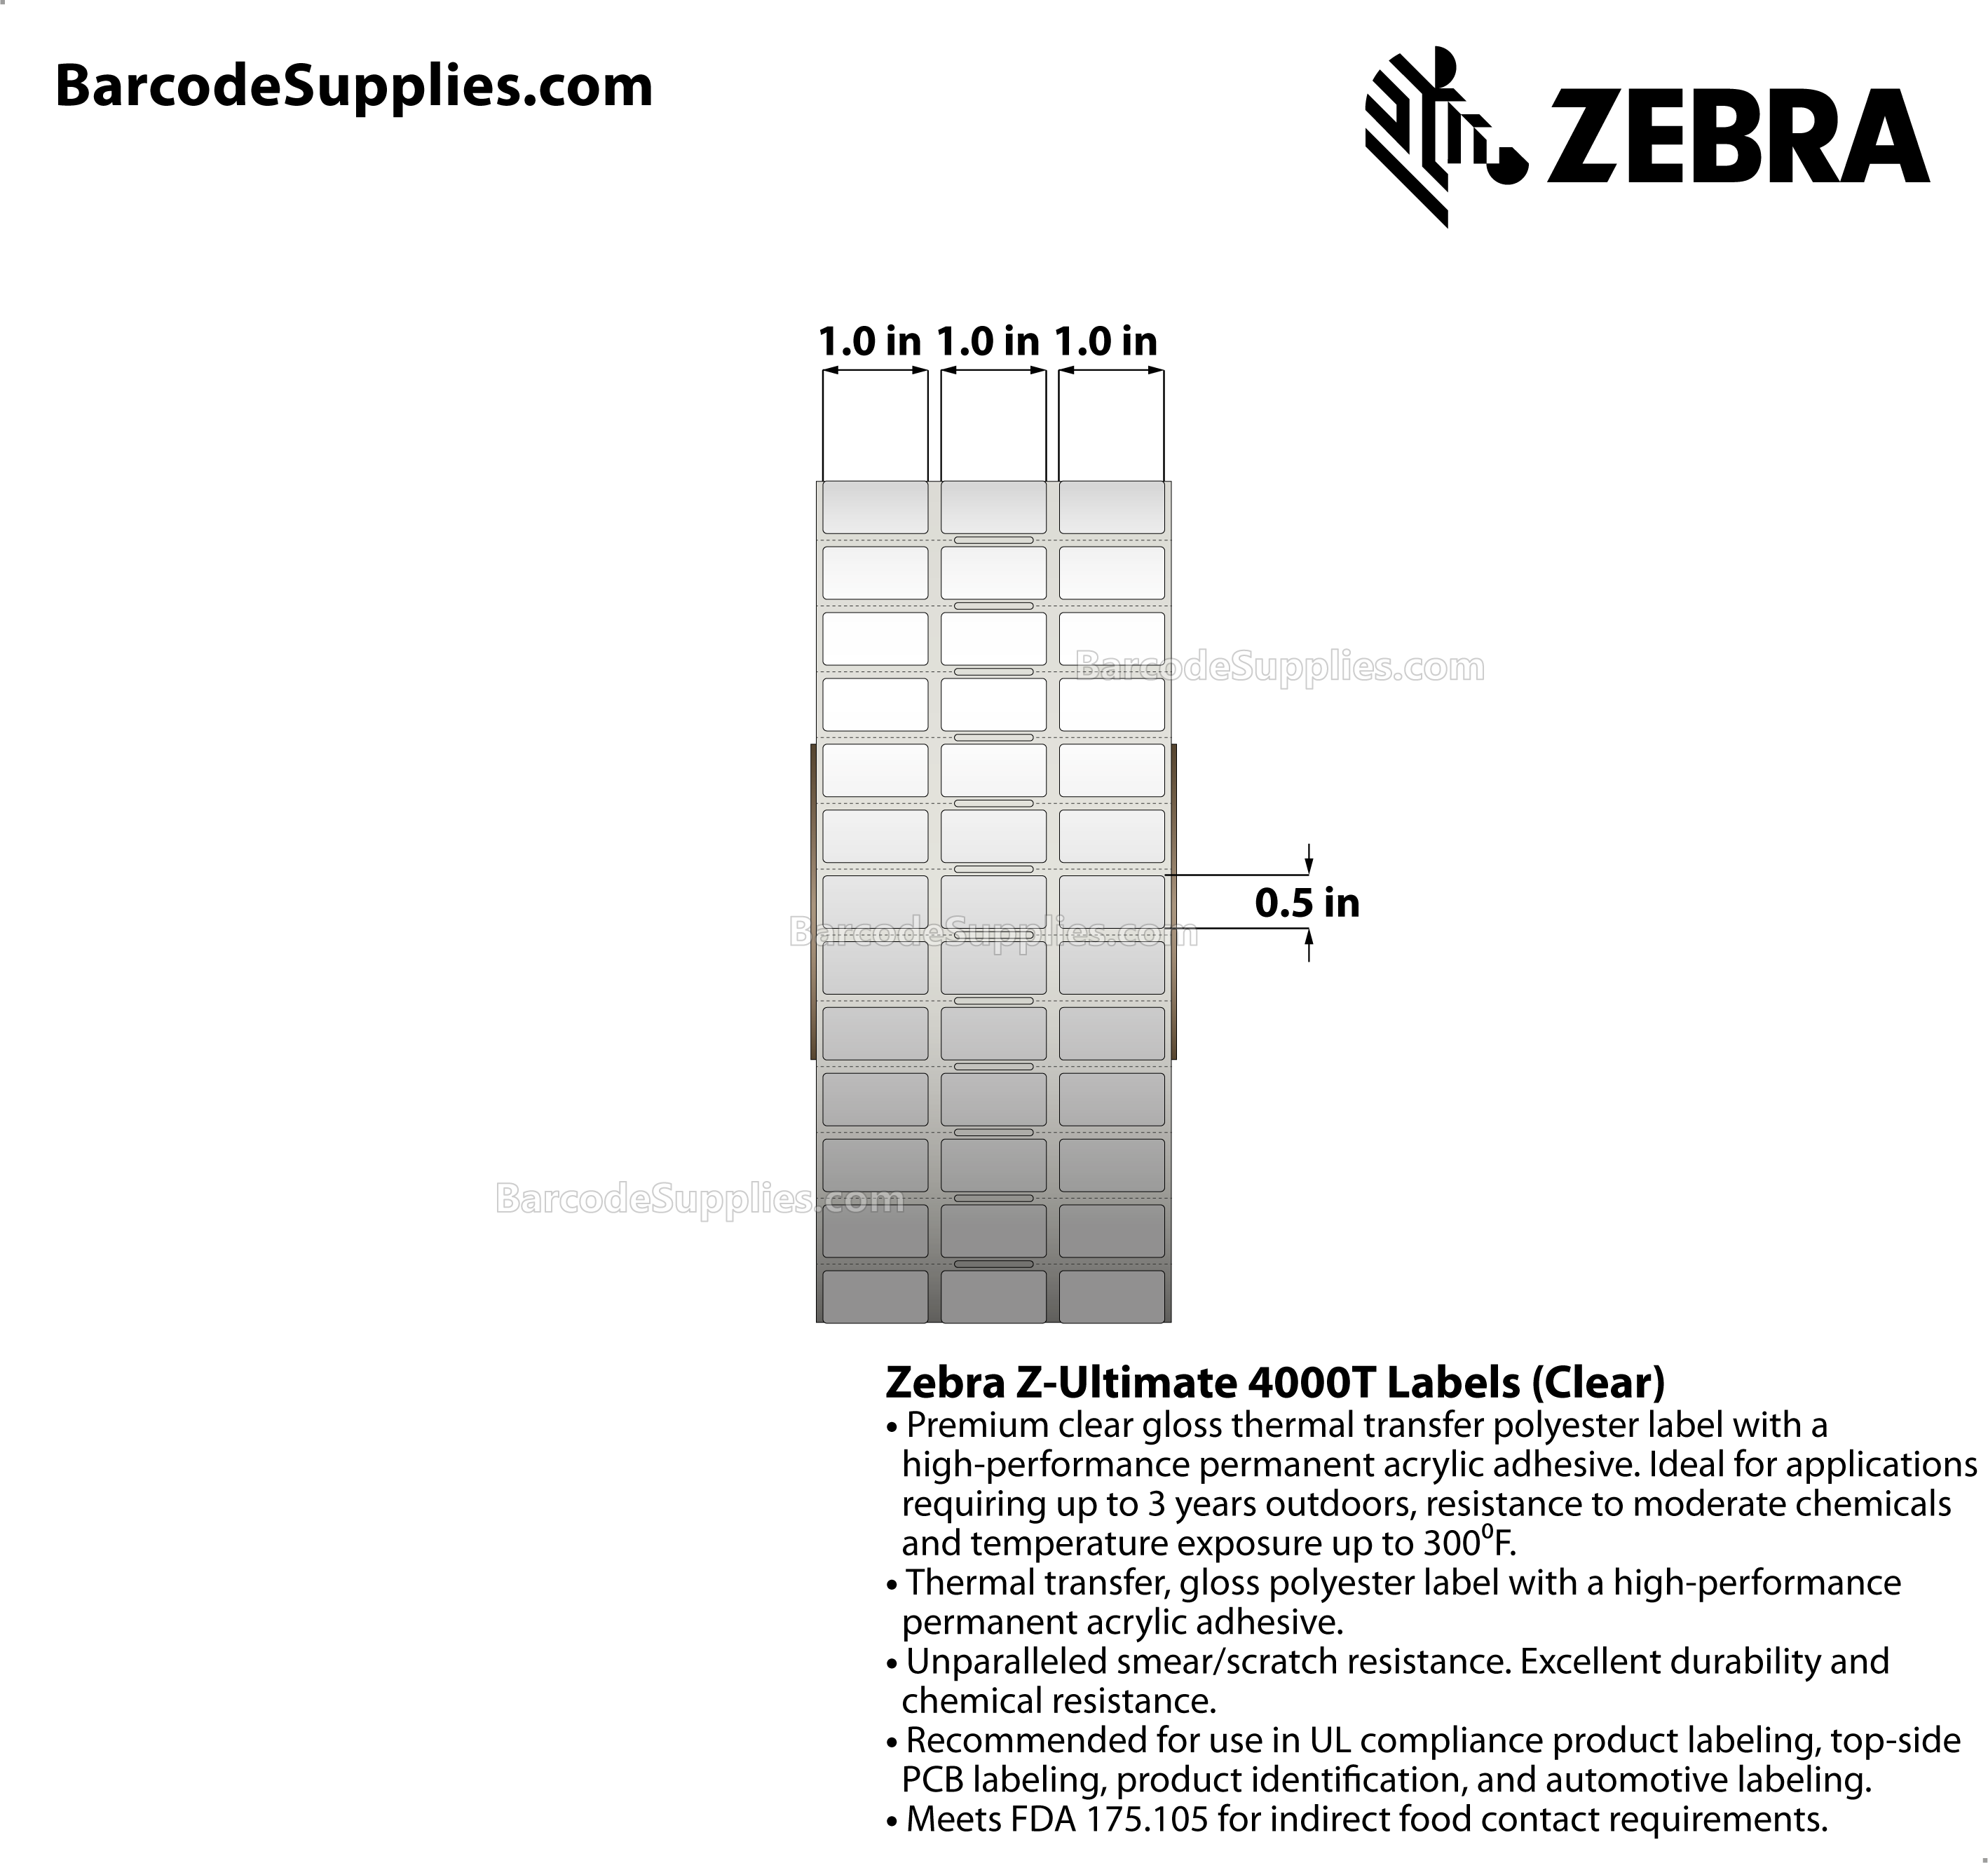 1 x 0.5 Thermal Transfer Clear Z-Ultimate 4000T Clear (3-Across) Labels With Permanent Adhesive - Notch sensing - Perforated - 10002 Labels Per Roll - Carton Of 1 Rolls - 10002 Labels Total - MPN: 10023043